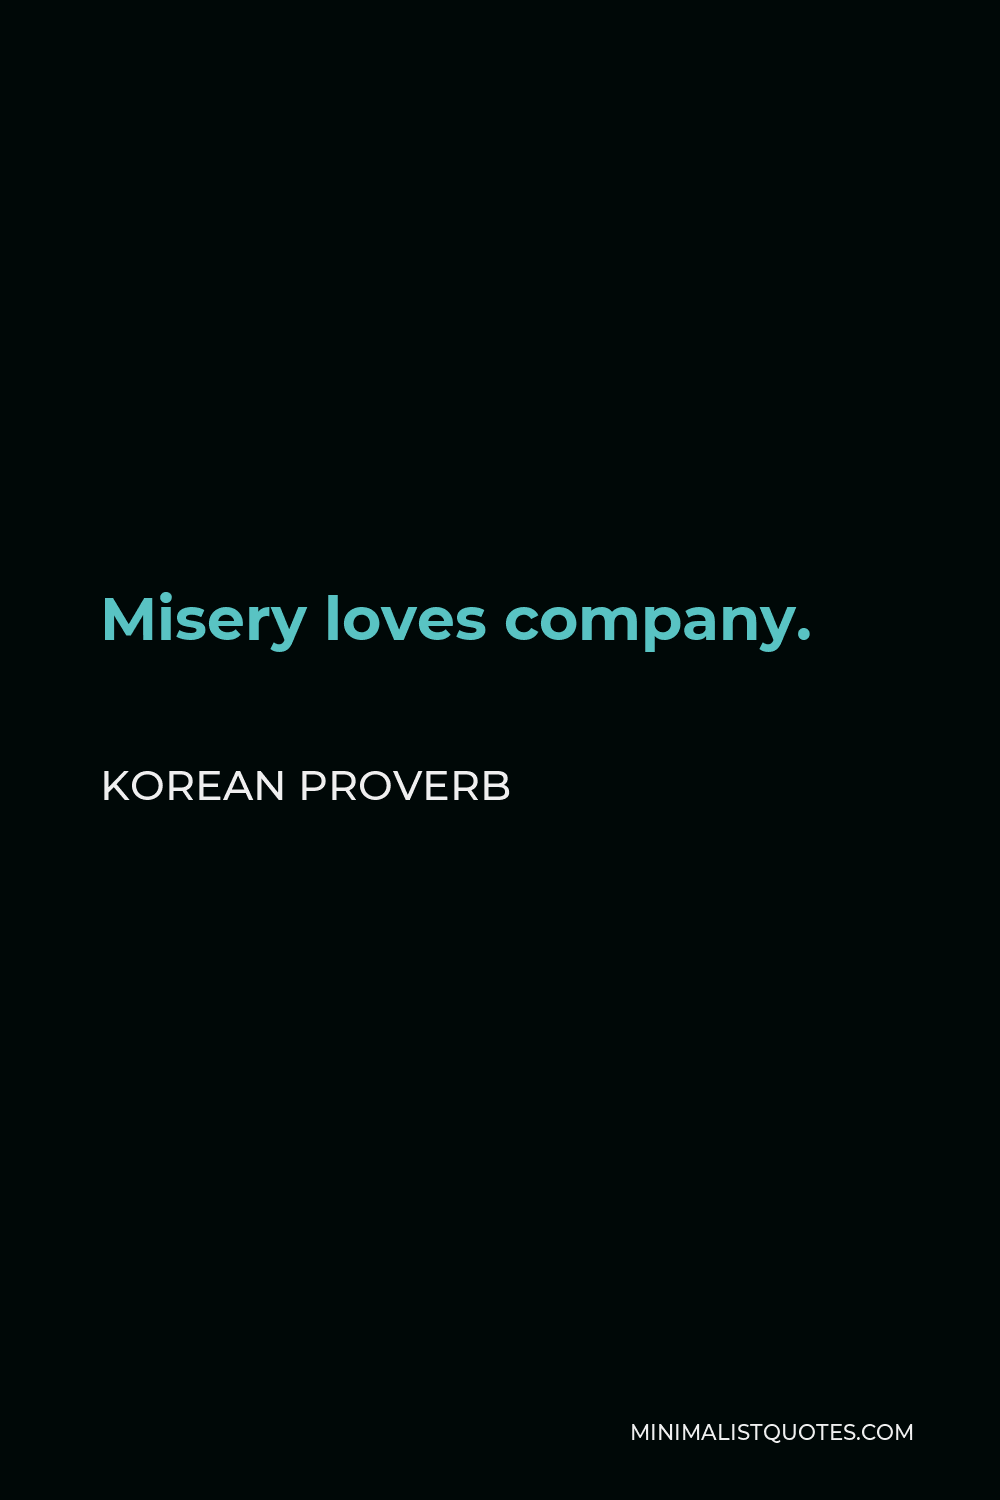 Korean Proverb Quote - Misery loves company.